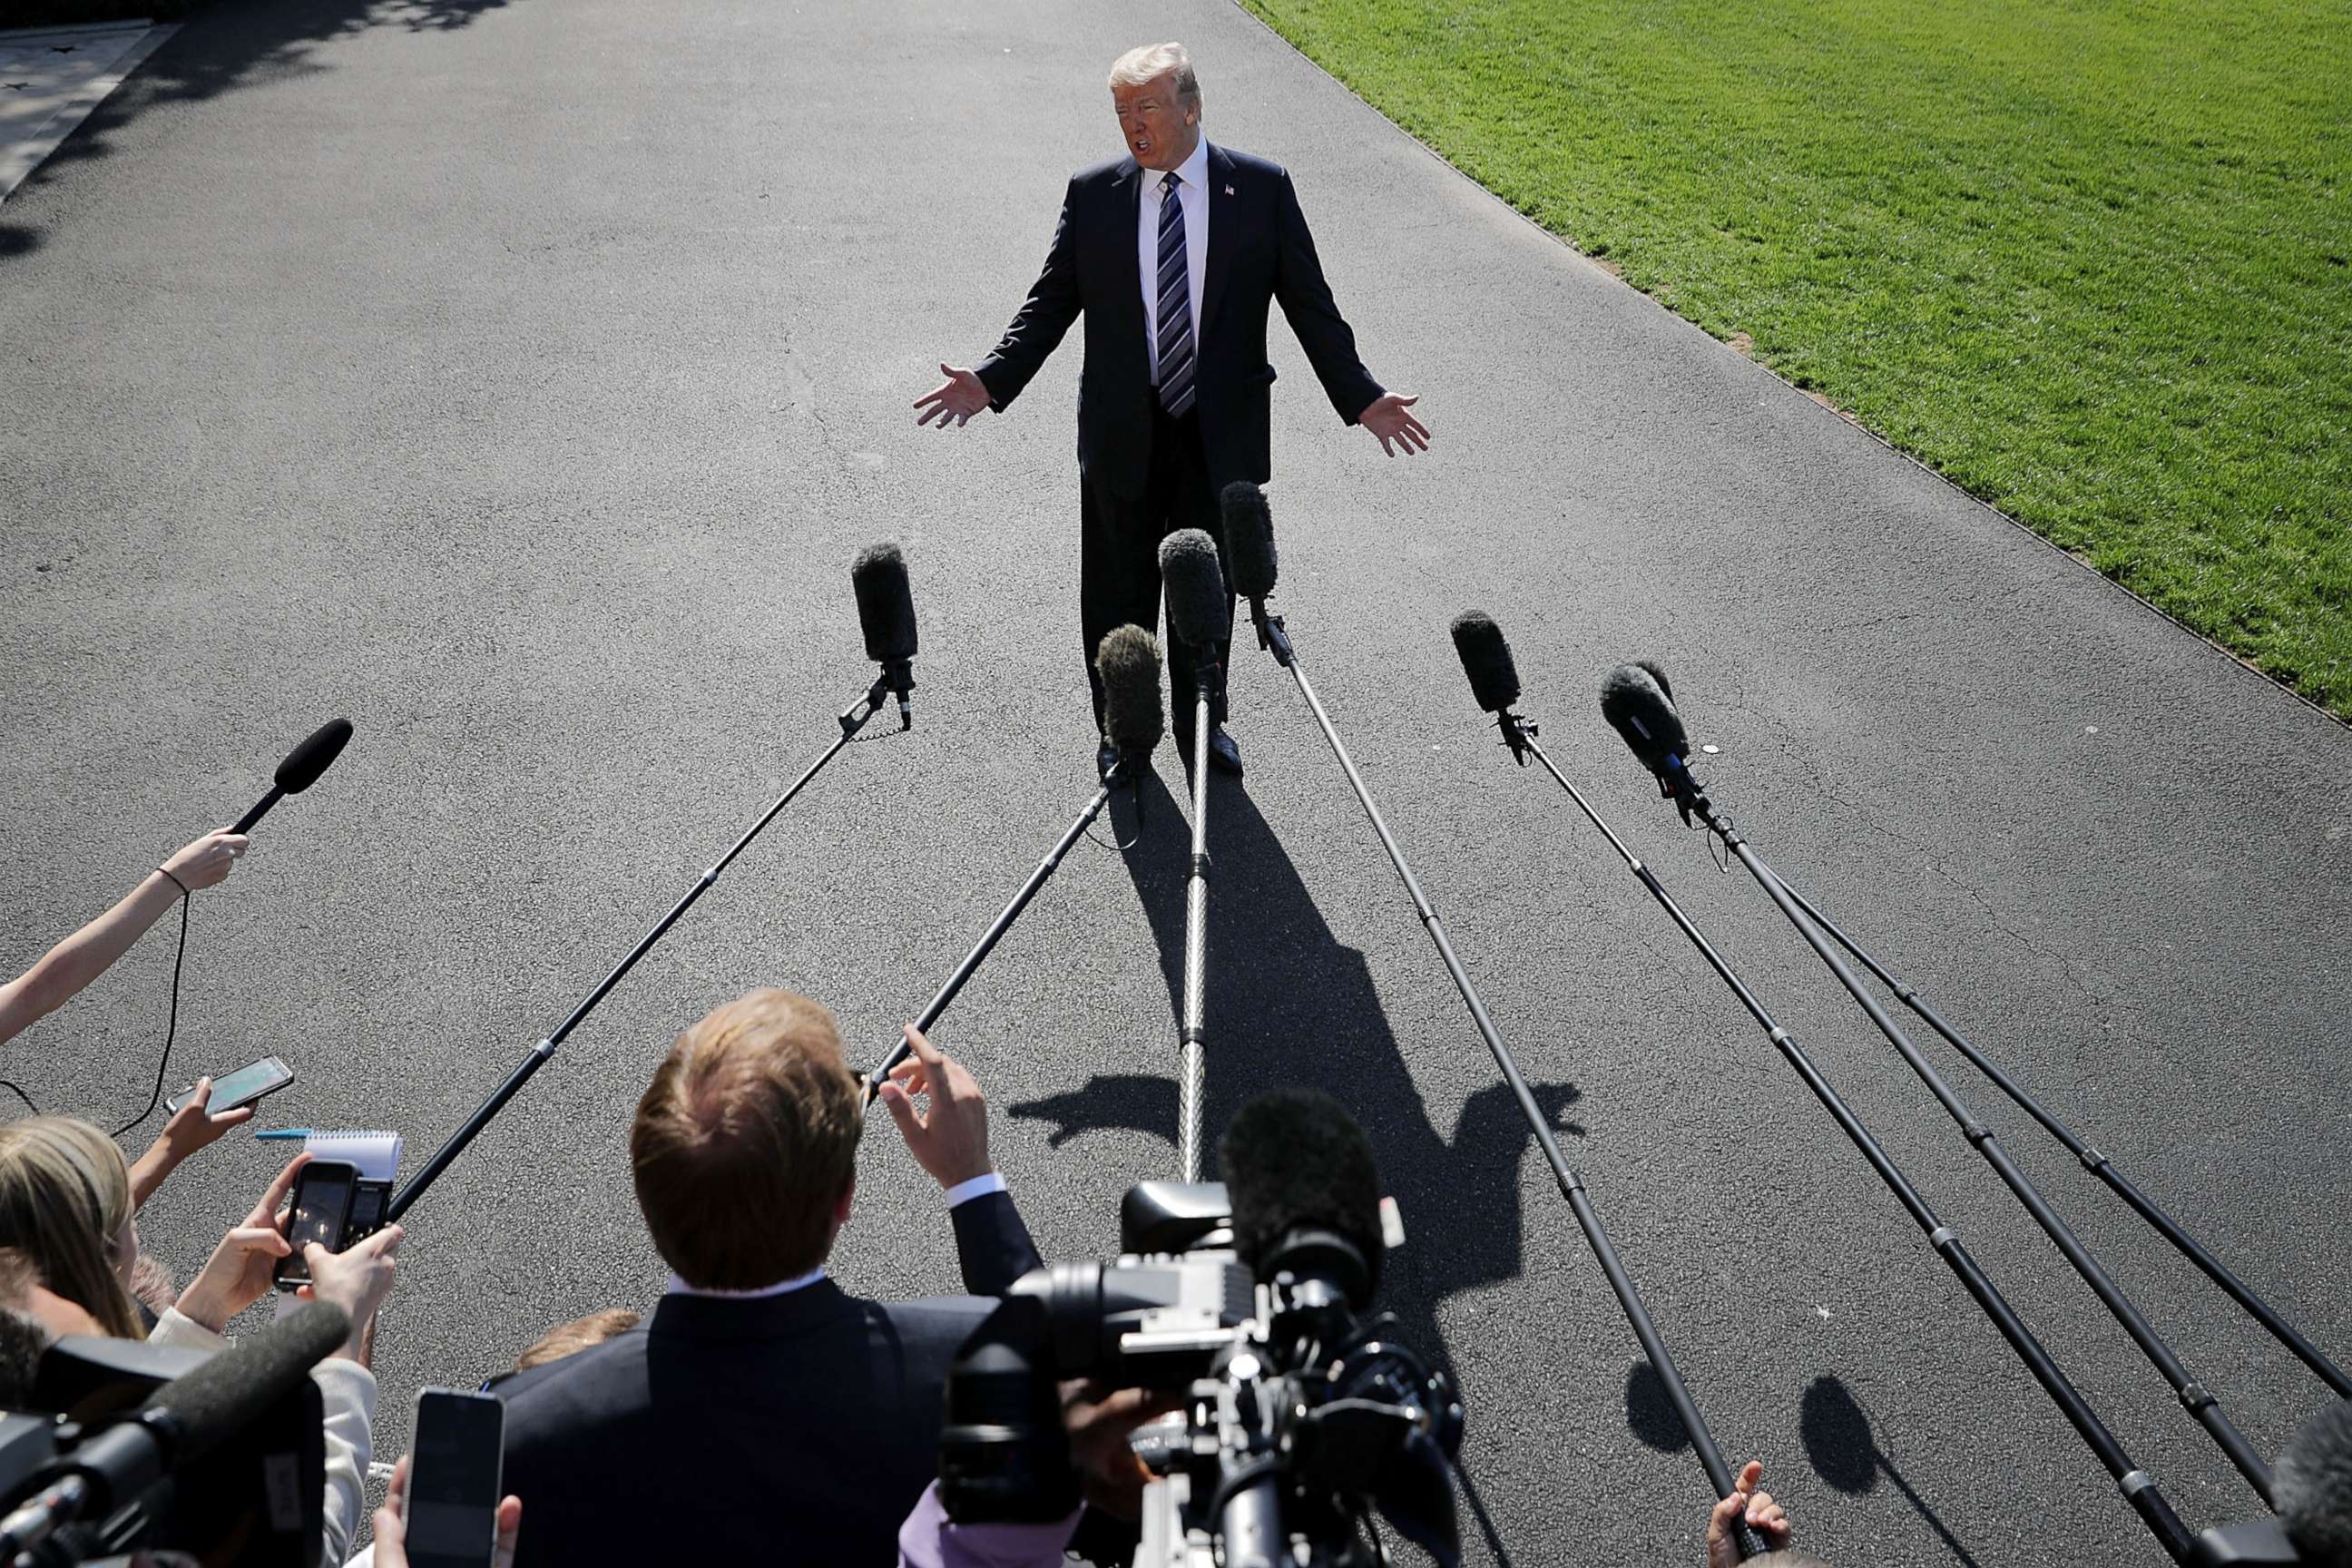 PHOTO: President Donald Trump talks to members of the news media before departing the White House, May 25, 2018 in Washington, D.C.